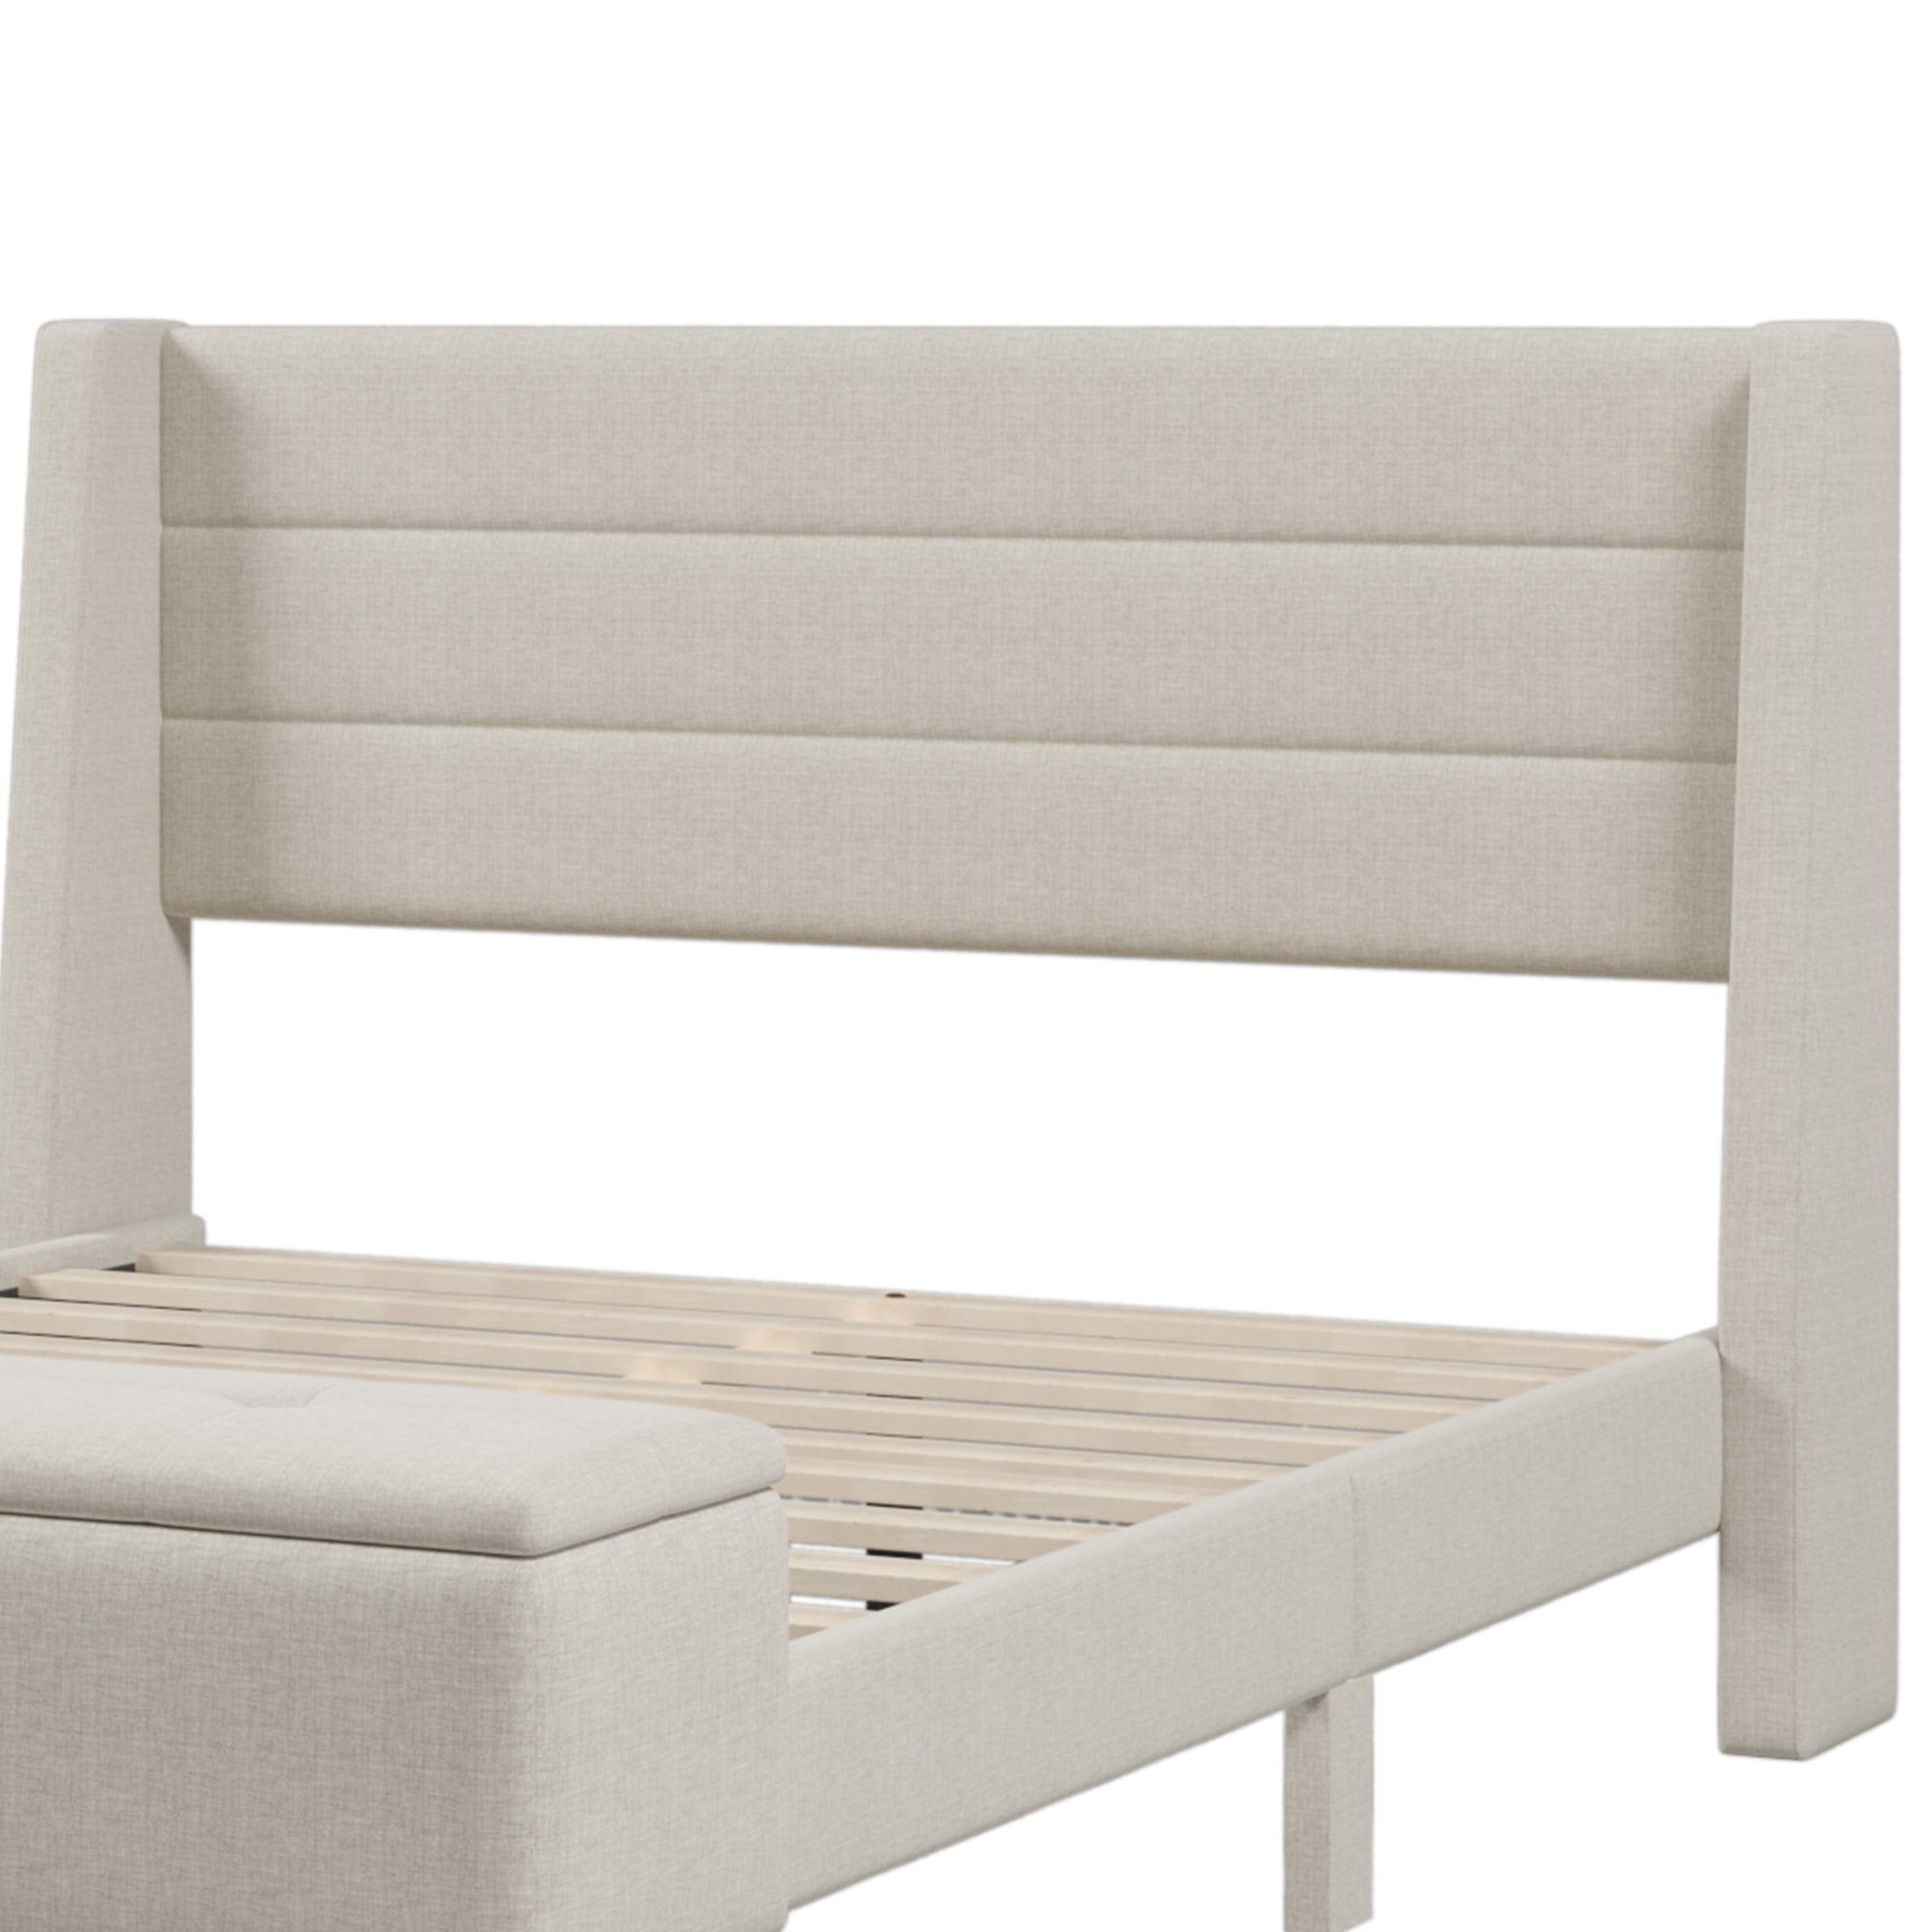 Upholstered Storage Bed Frame with Storage Ottoman Bench Queen size(Beige)